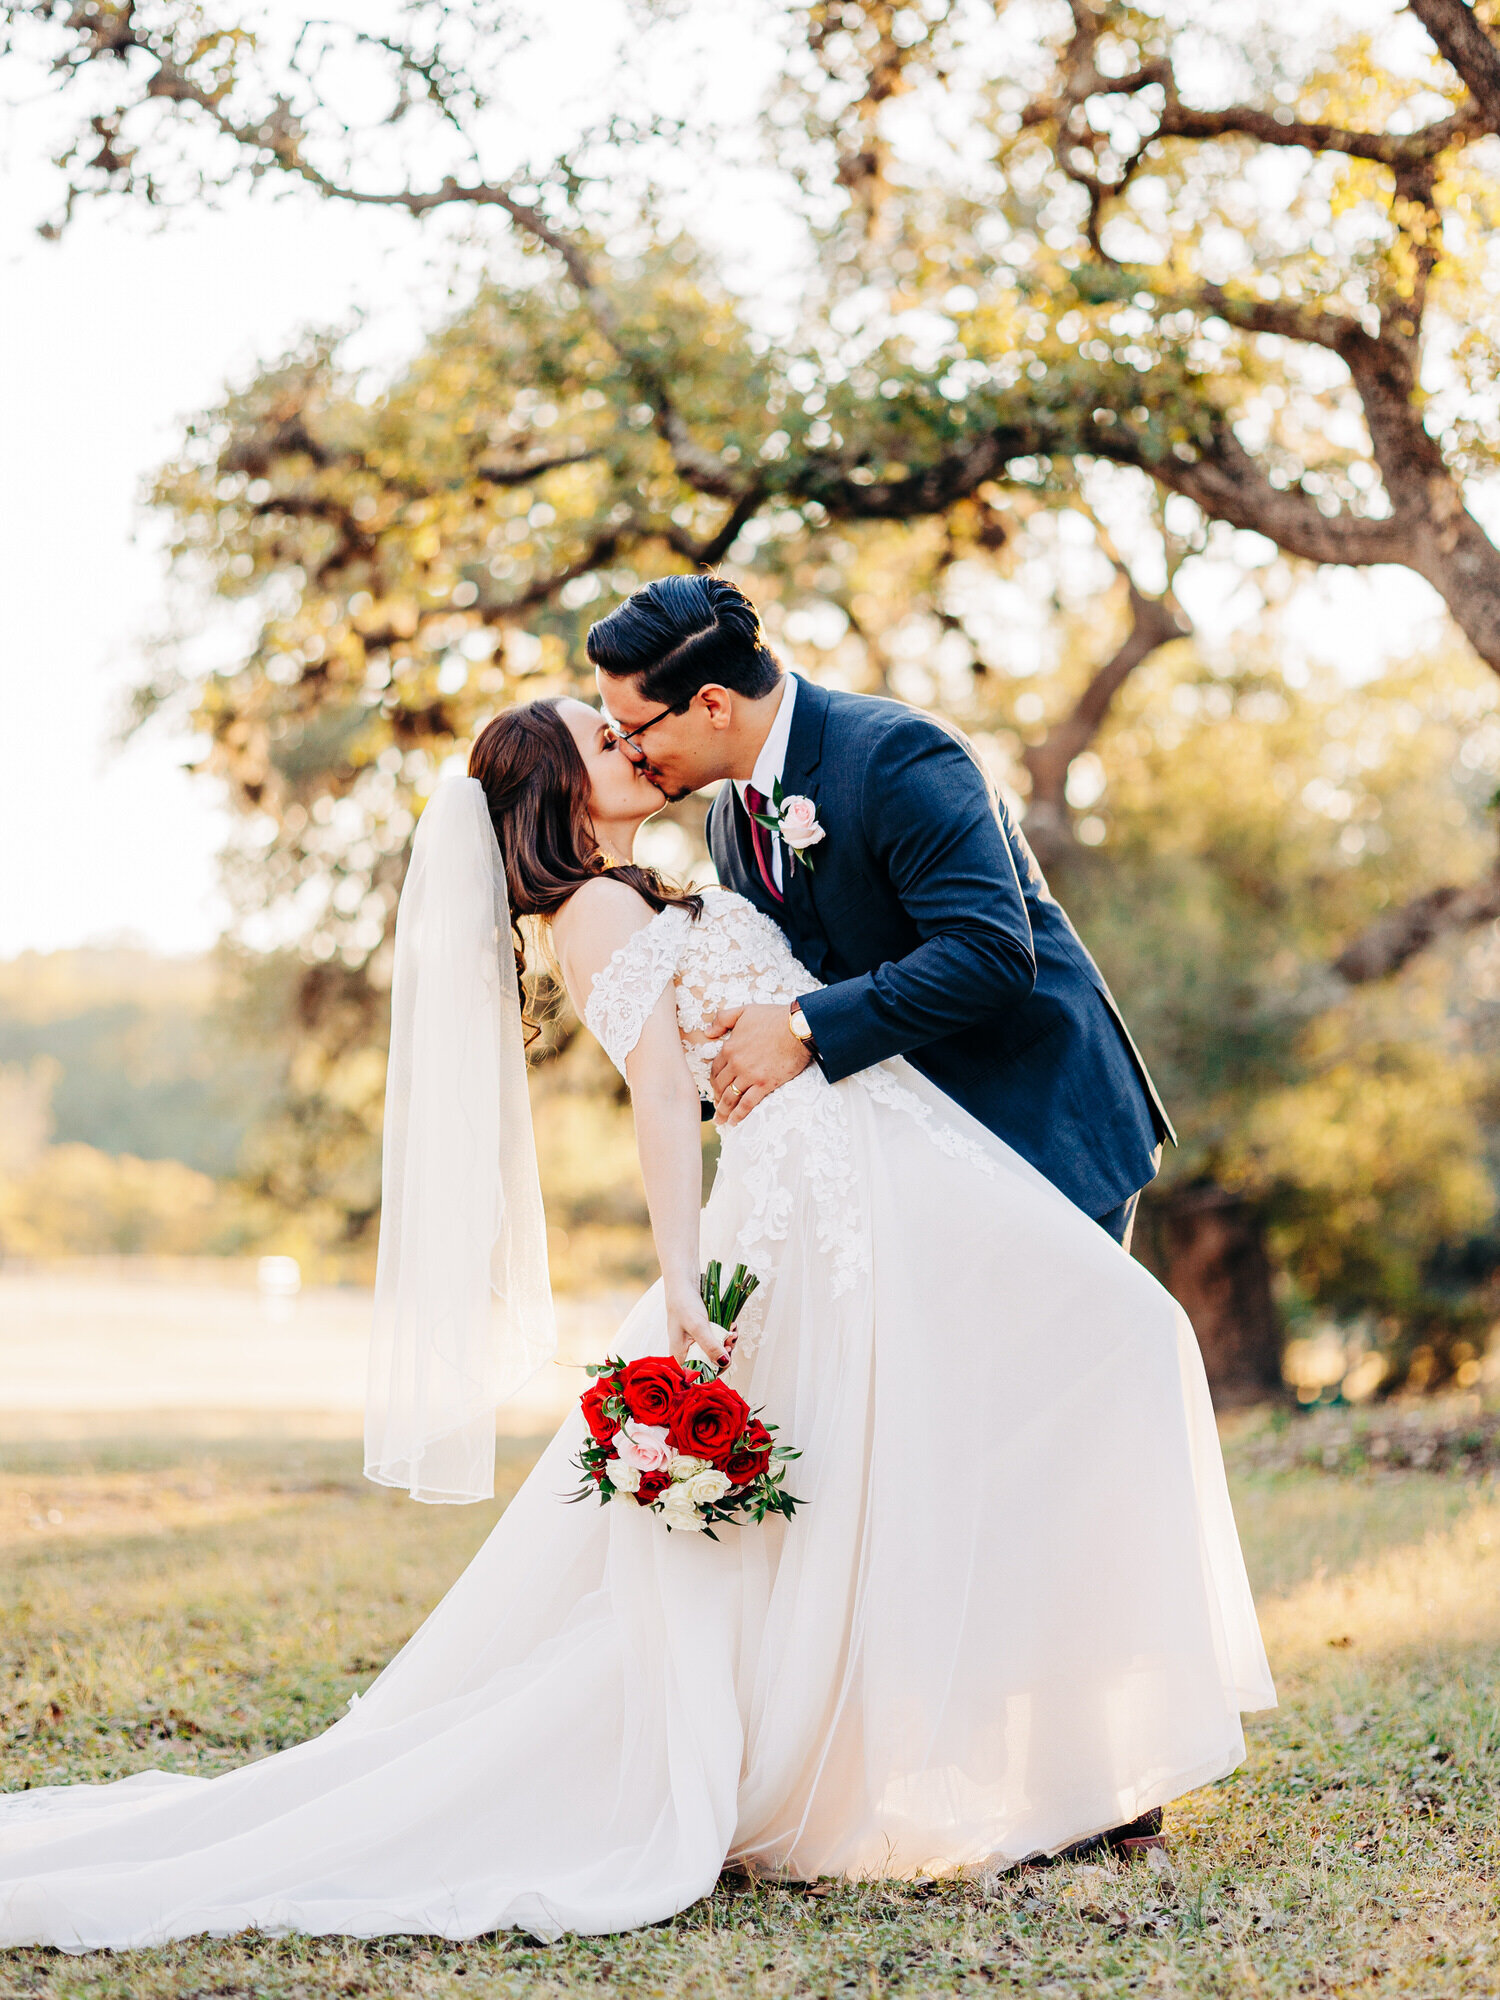 This image features a bride and a groom at a fall wedding. The groom, wearing a blue suit and a burgundy tie,  is dipping his bride while kissing her. The bride is wearing a mid-length veil. The image was taken by KD Captures, a wedding photographer in San Antonio.